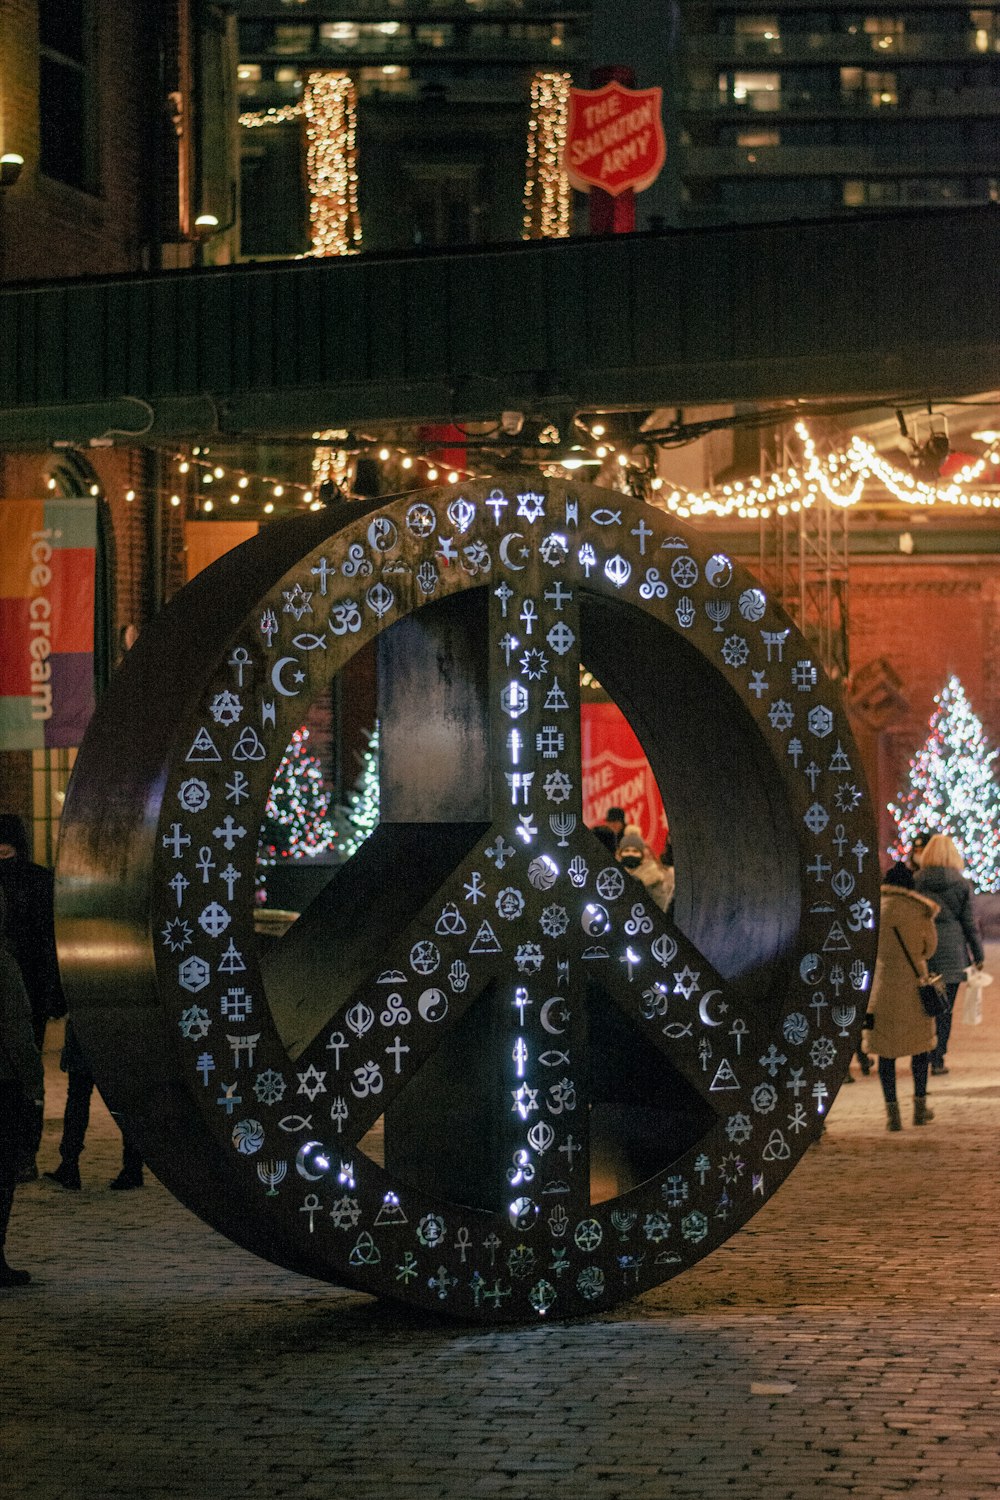 a peace sign on a city street at night